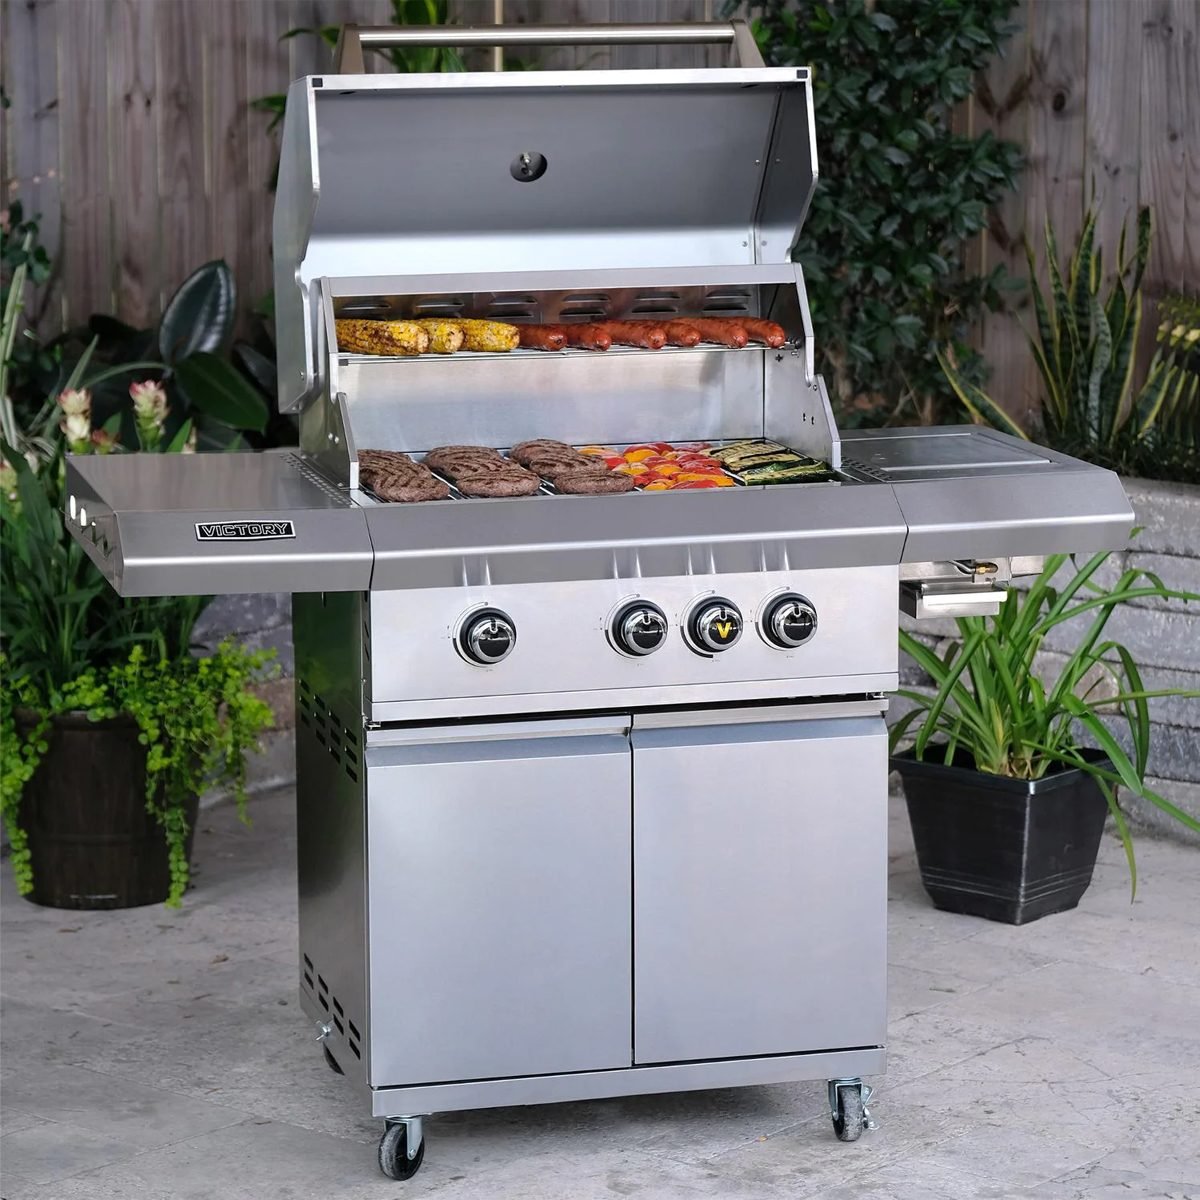 These Are the Best Grill Sales for Memorial Day: Up to 50% Off Kamado Joe, Solo Stove and Weber